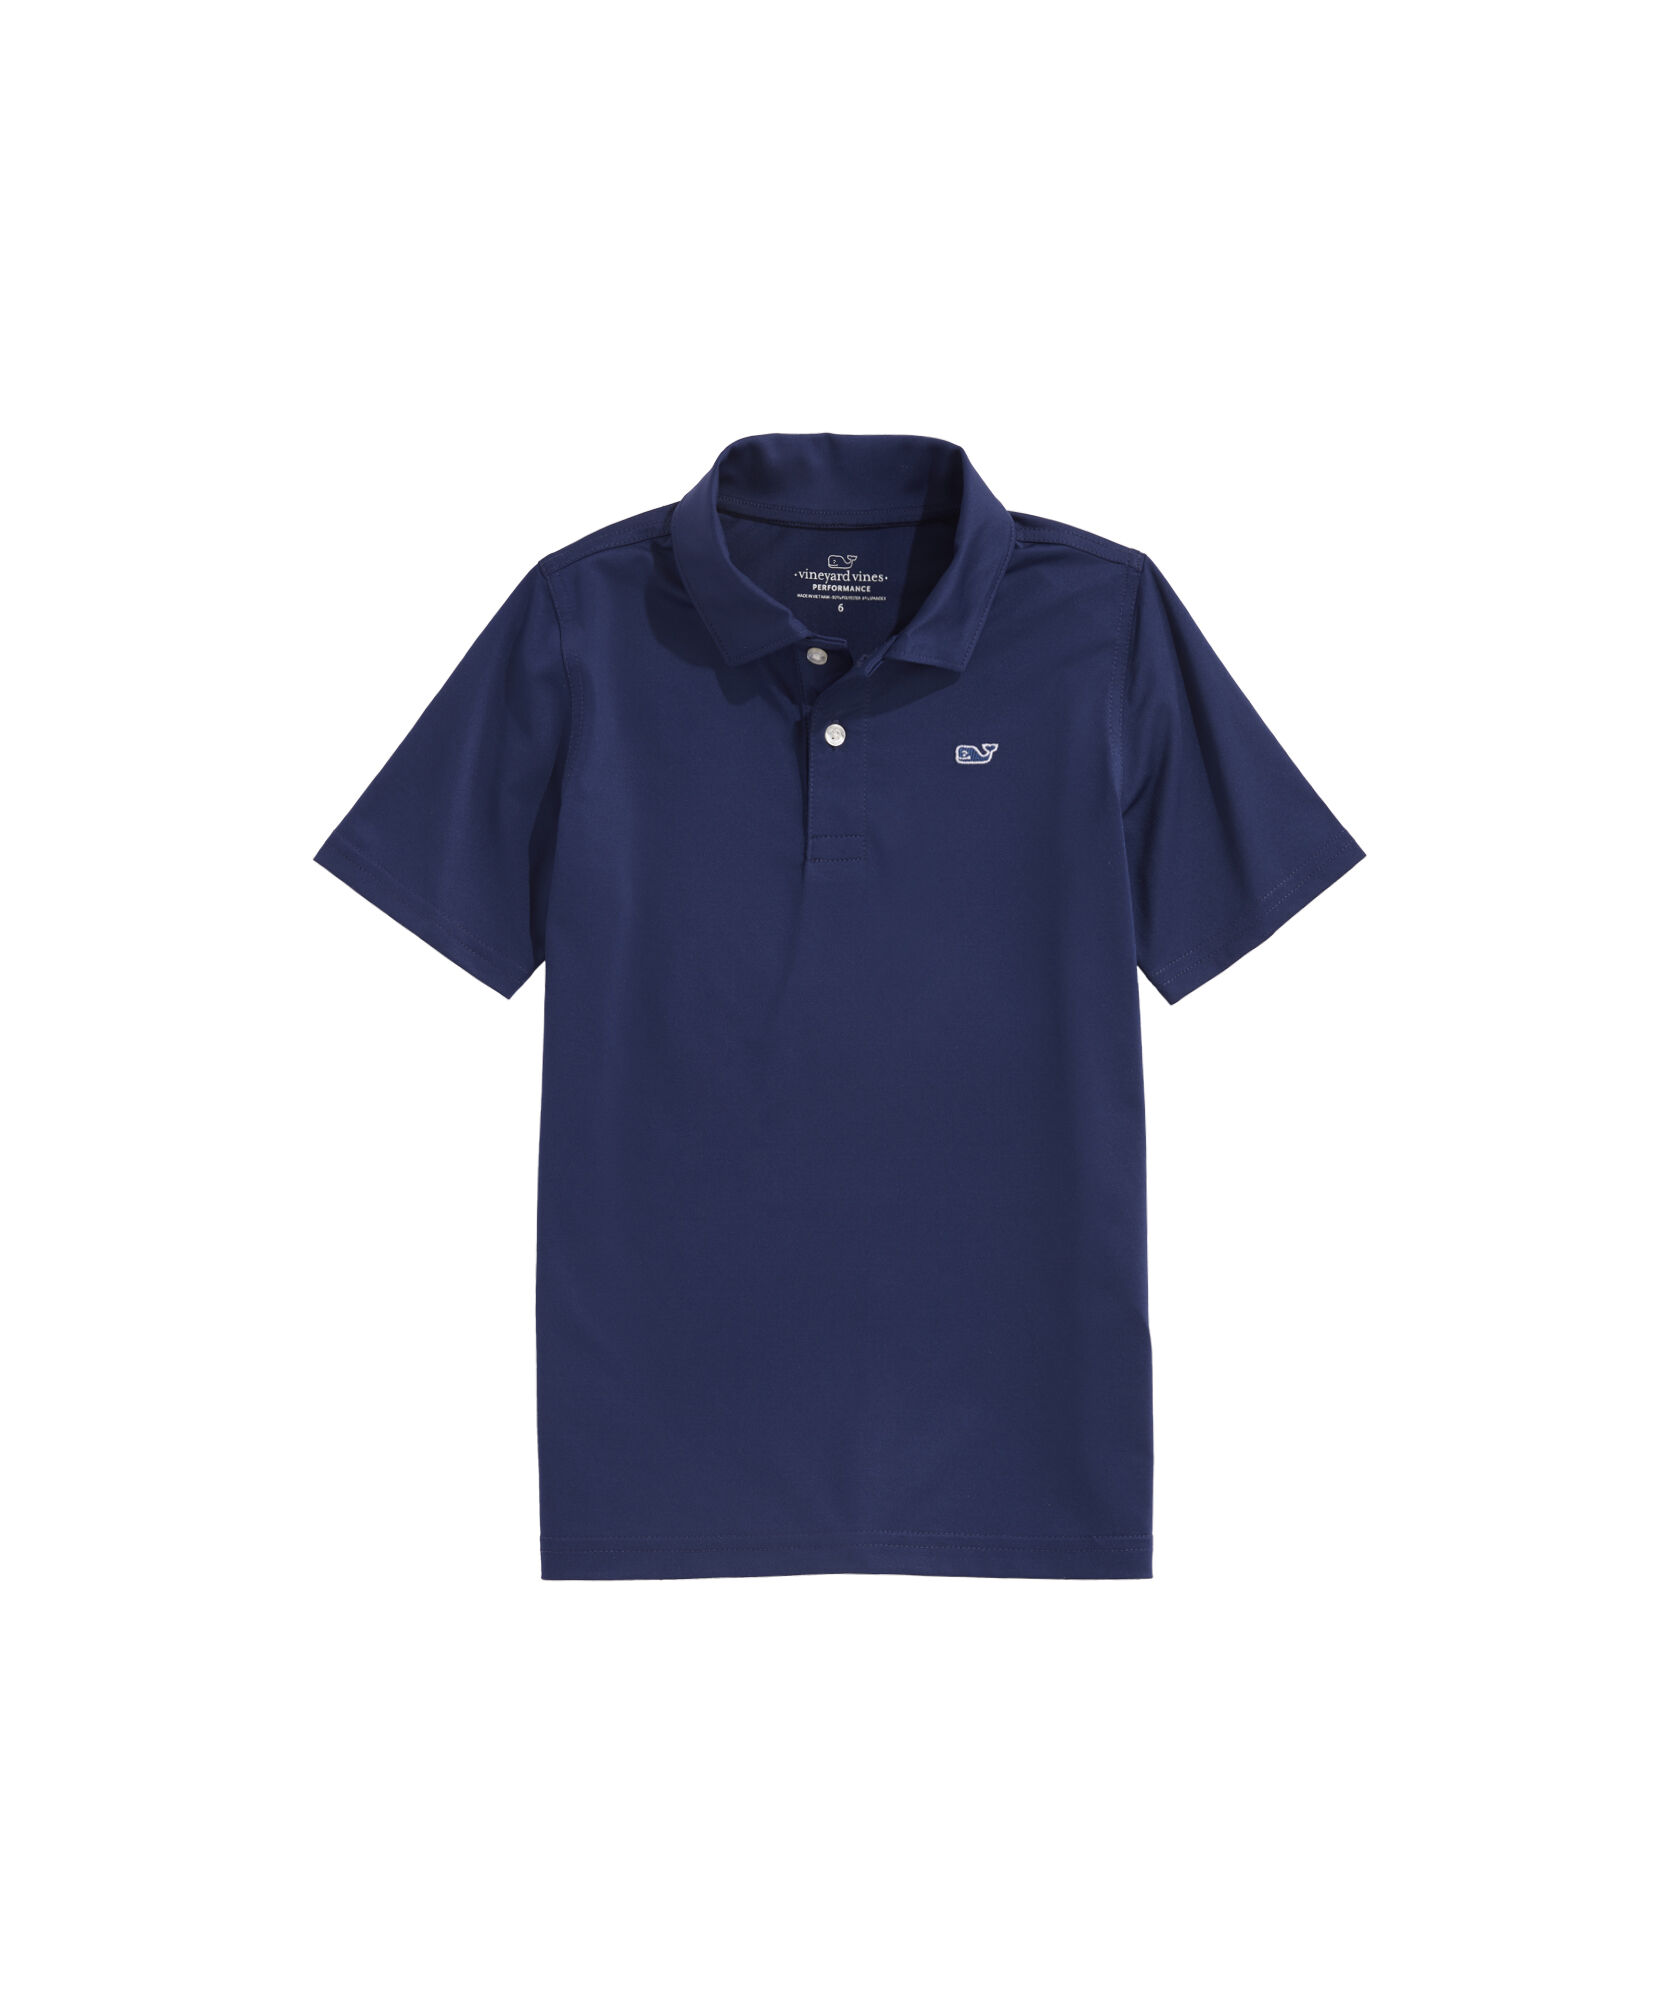 OUTLET Kids' Solid Performance Polo